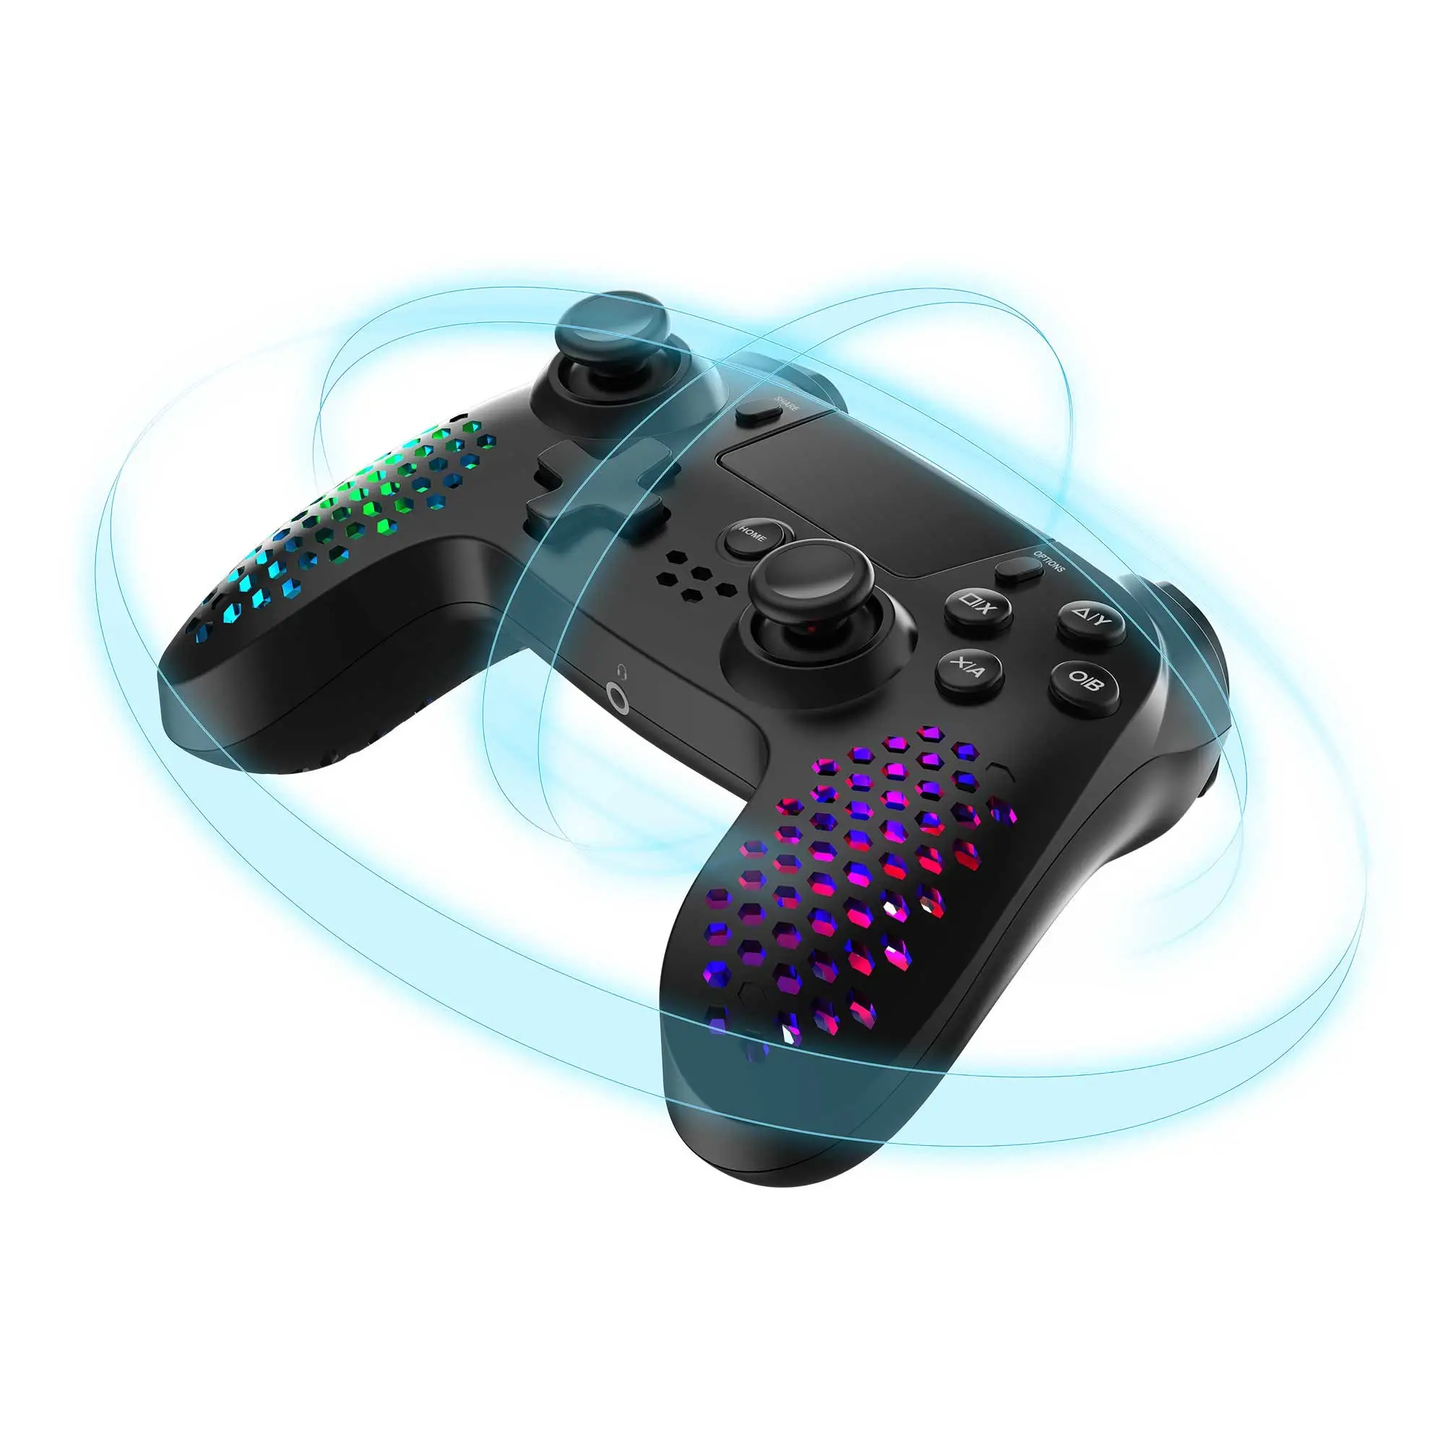 Bluetooth Joystick Subsonic Hexalight Controller with RGB LED